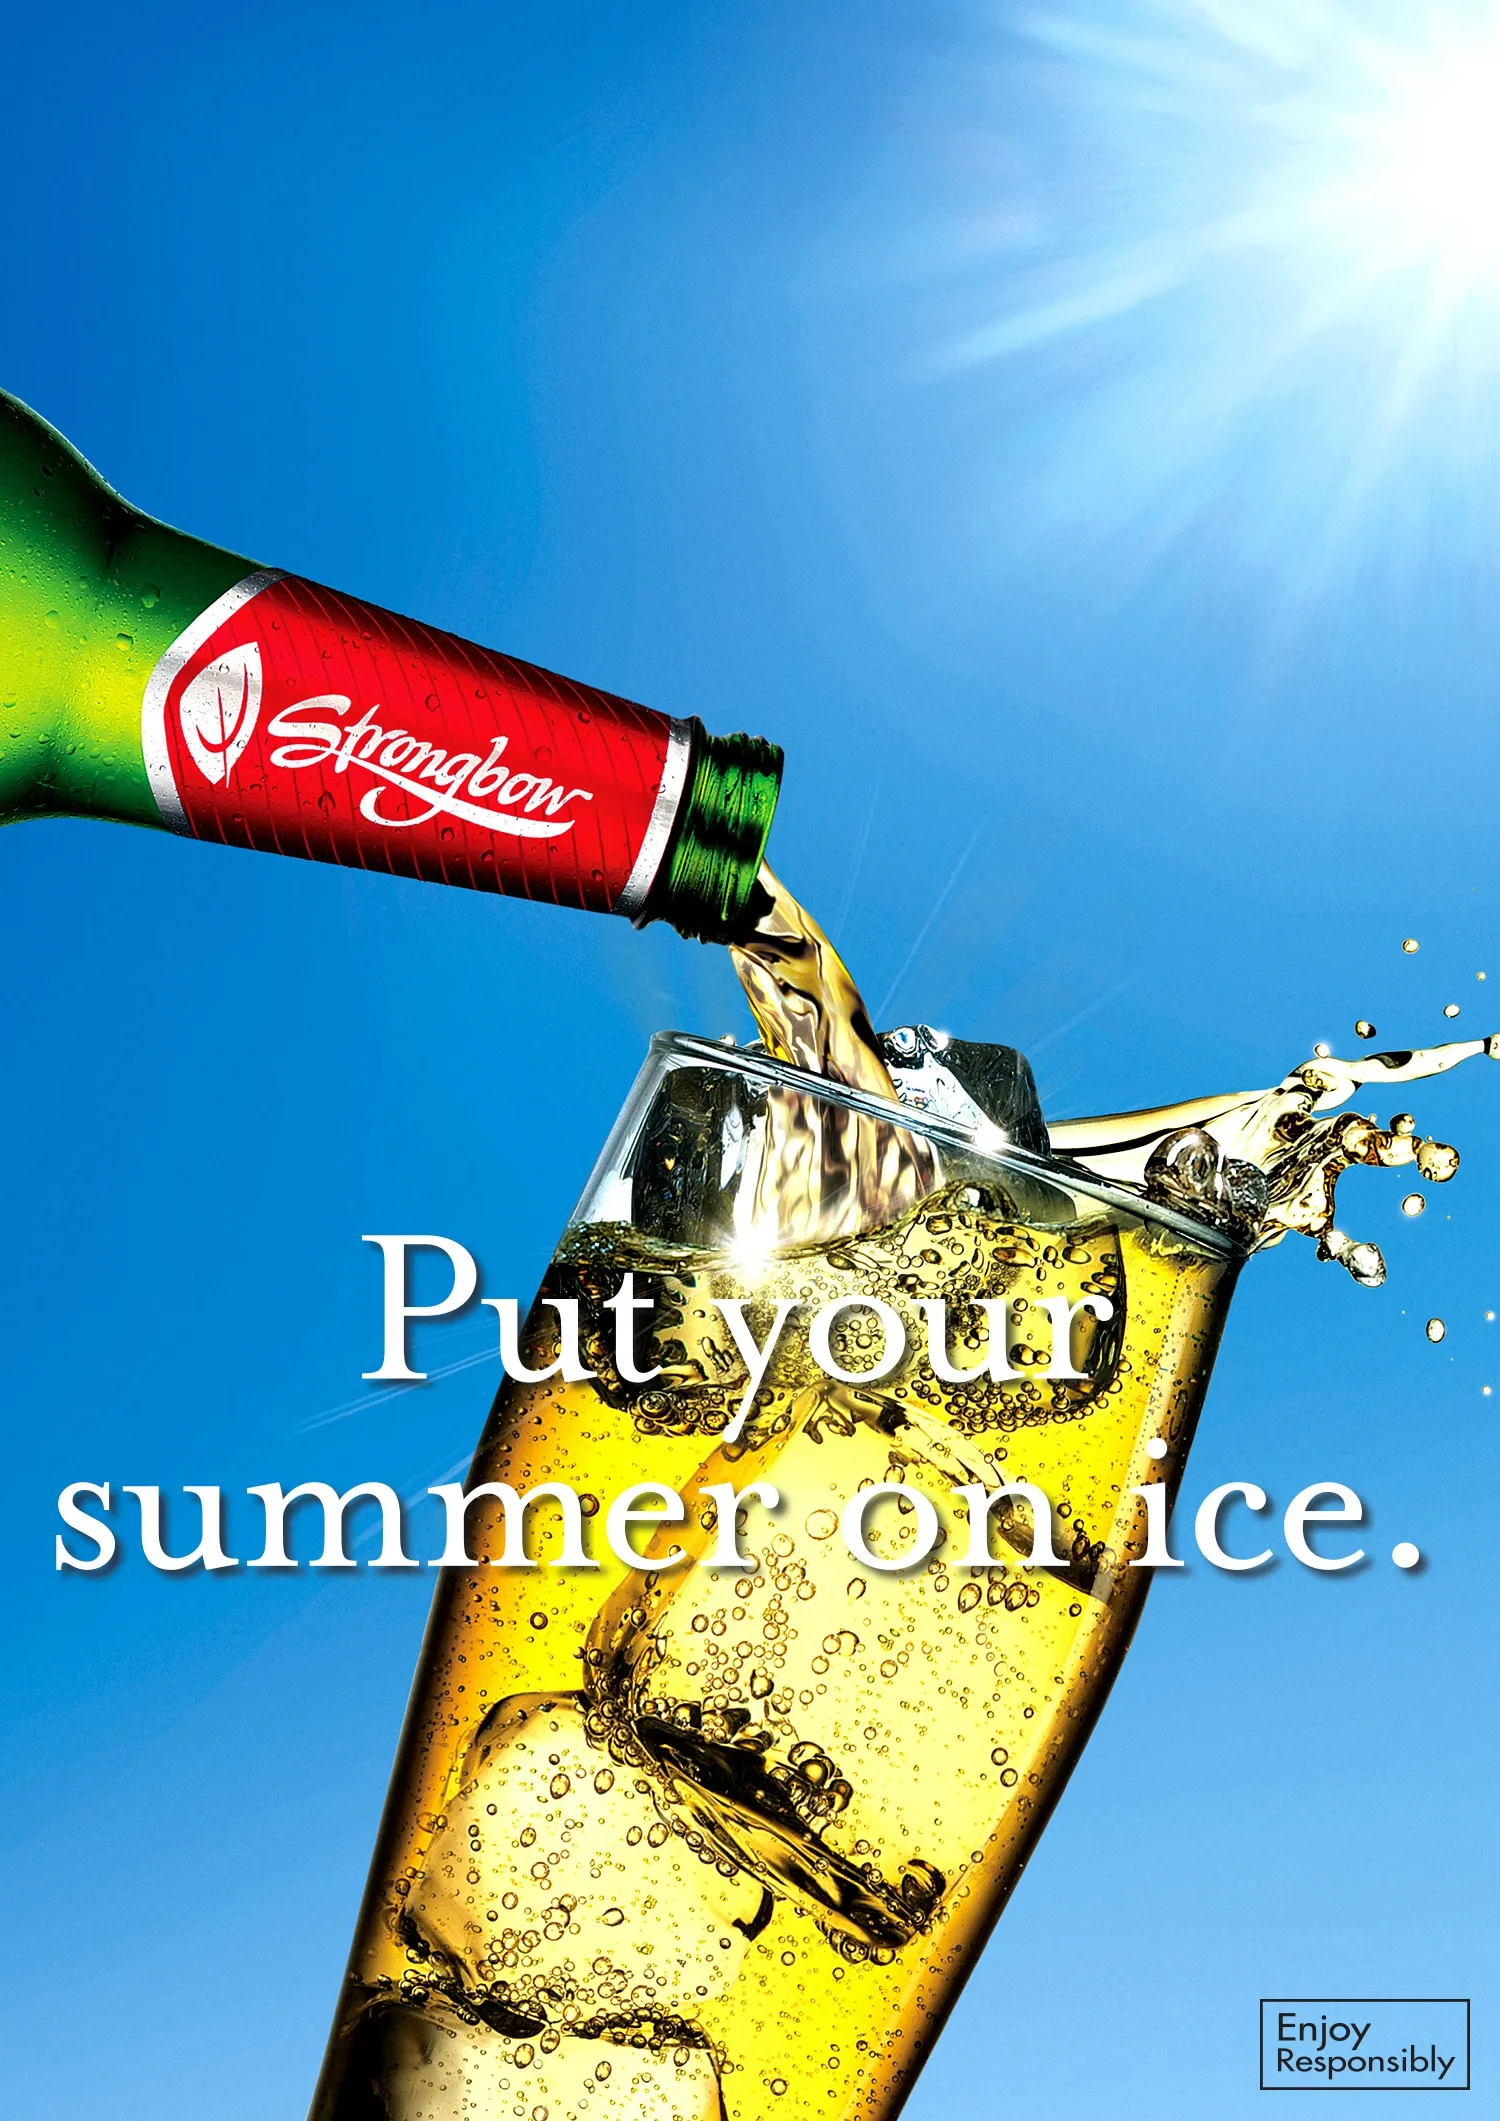 An outdoor poster for Strongbow that says "Put your summer on ice" and shows cider being poured into a glass in summer